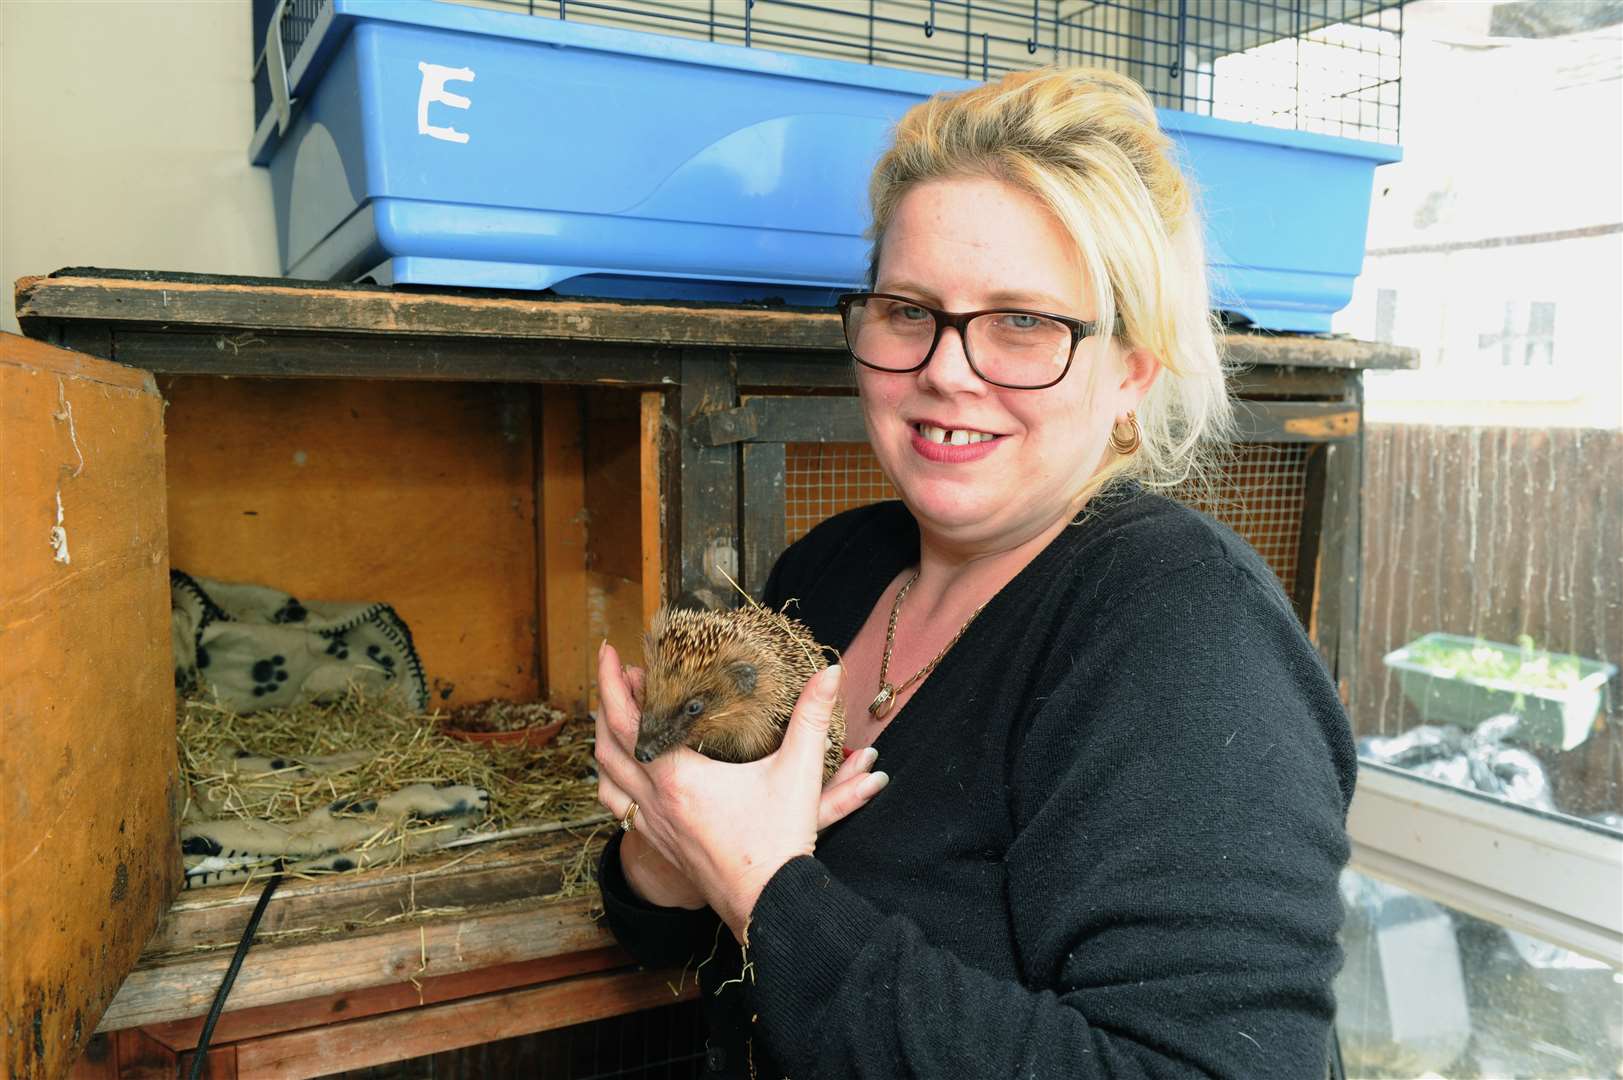 Kelly Smith looks after 16 hedgehogs at her home in Strood